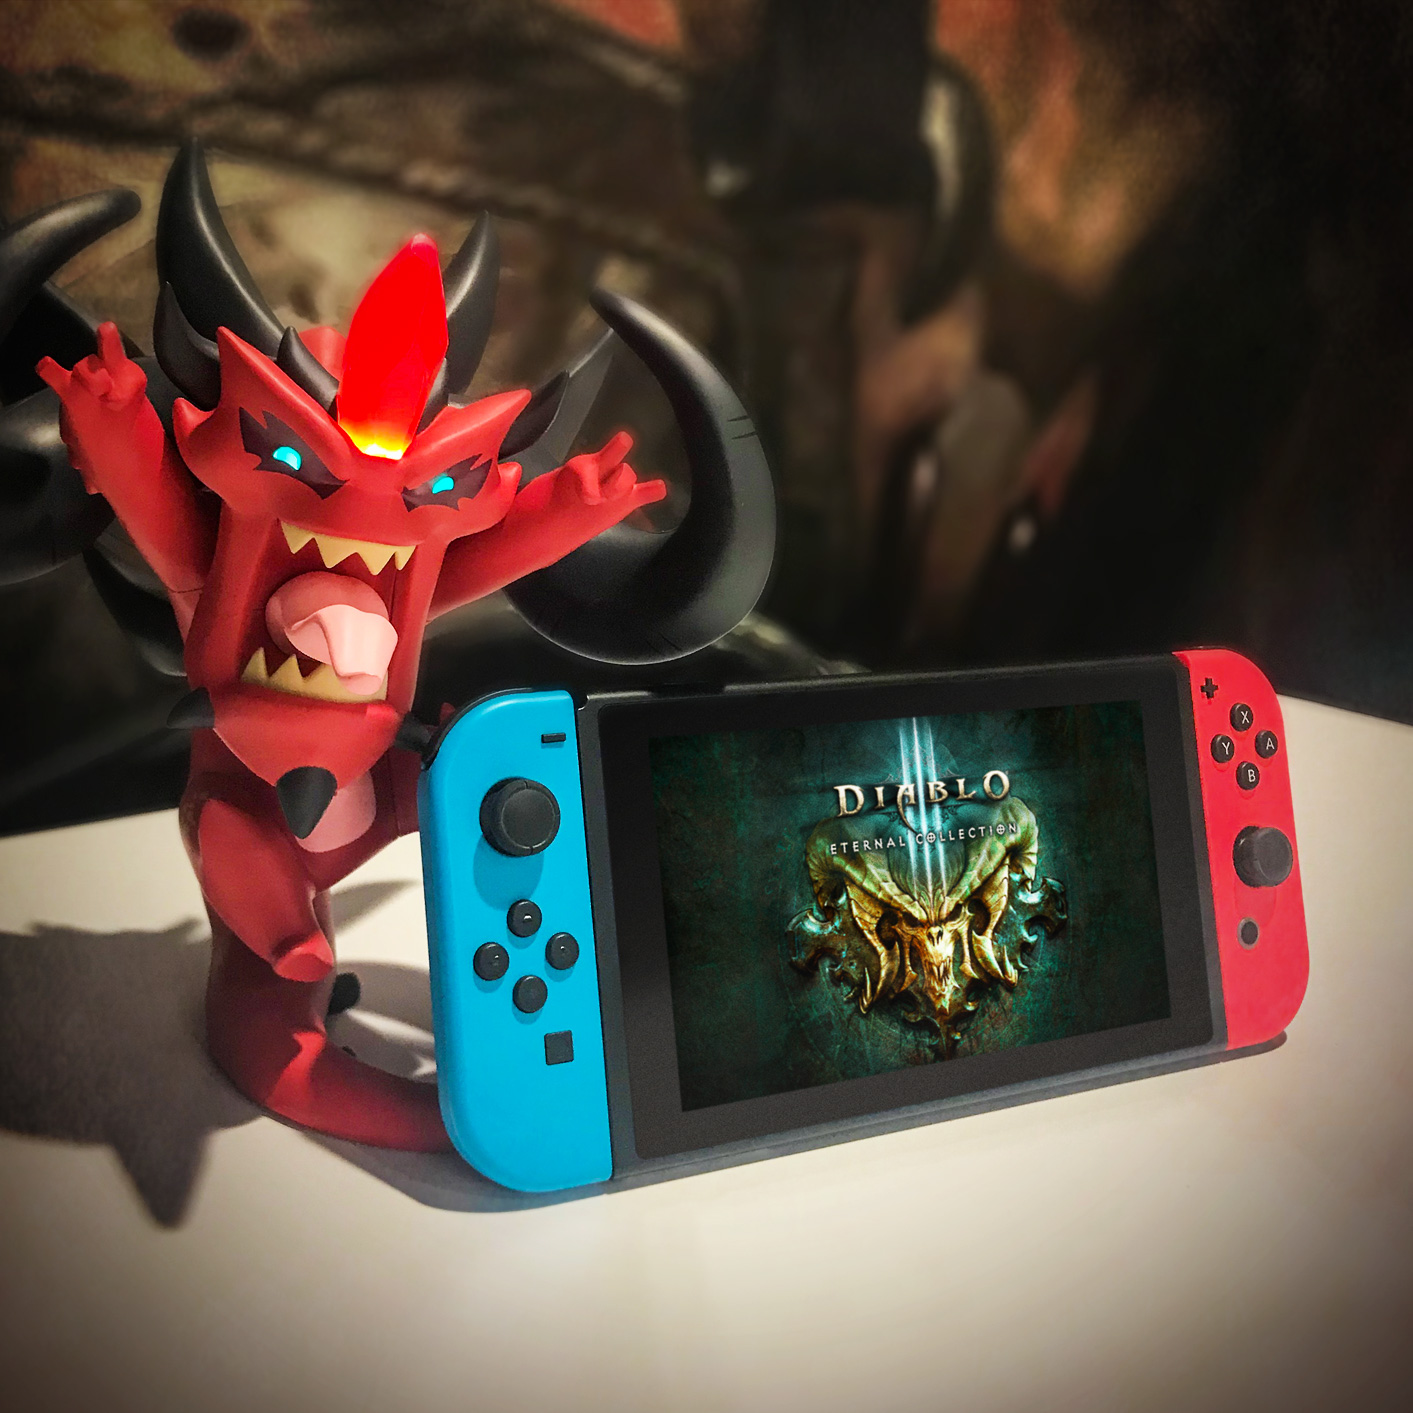 DIABLO® III ETERNAL COLLECTION™ BRINGS THE LEGENDARY ACTION RPG TO NINTENDO SWITCH®